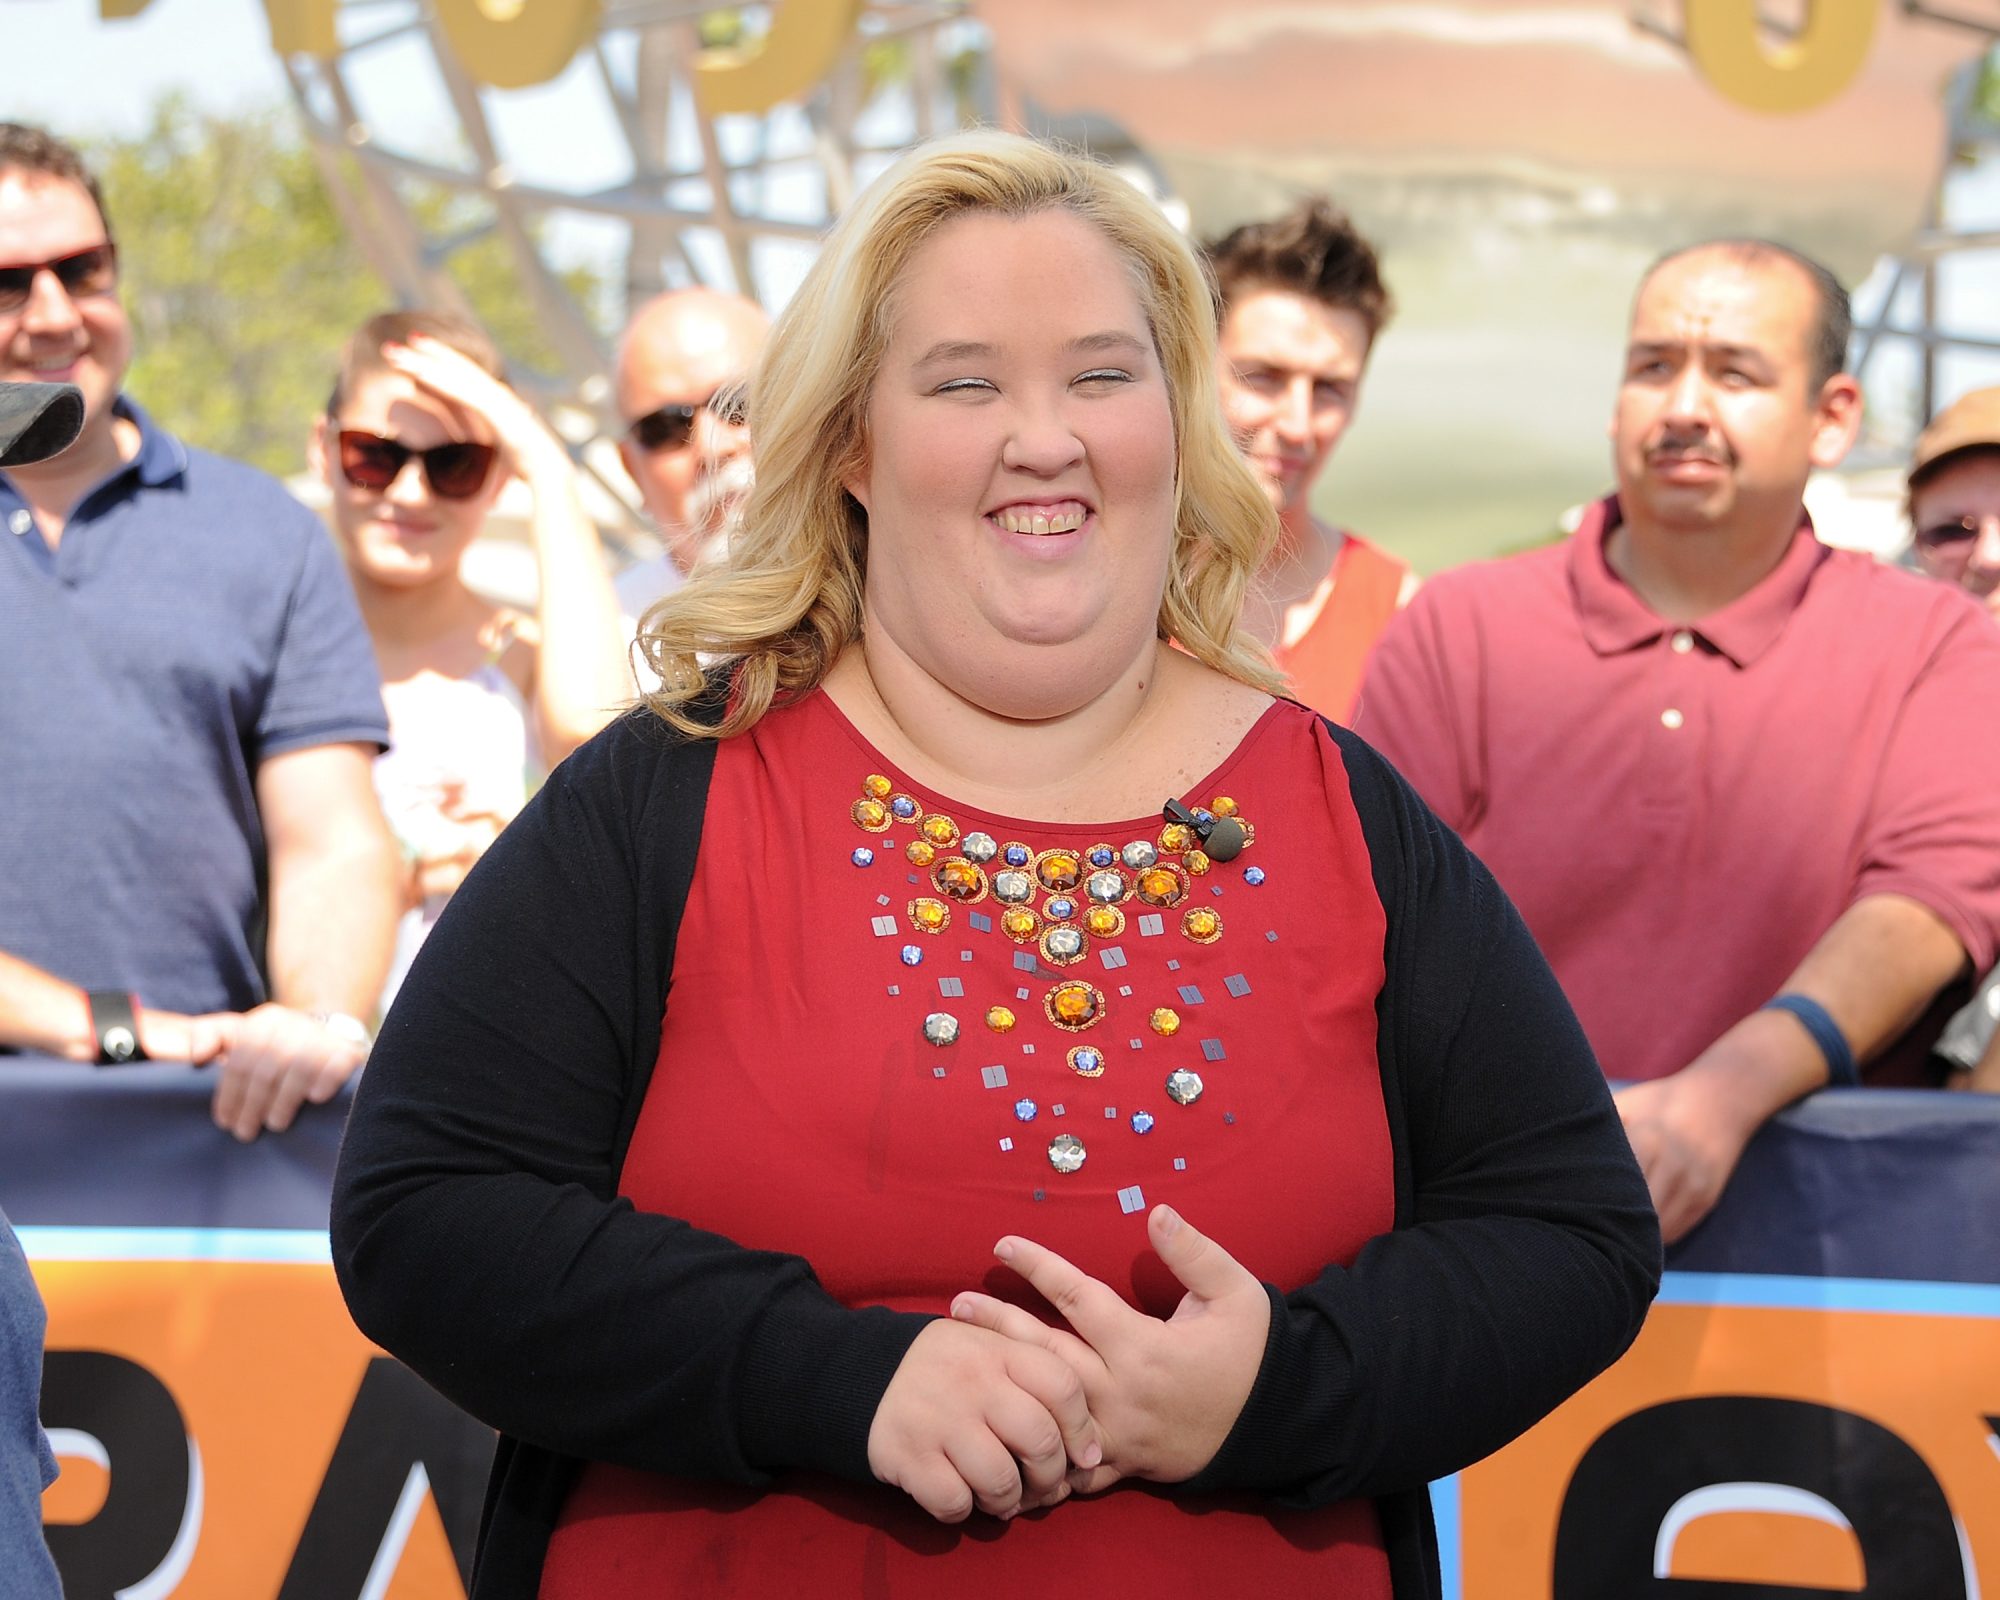 Honey Boo Boo's "Mama June" has a new weightloss show, and it looks